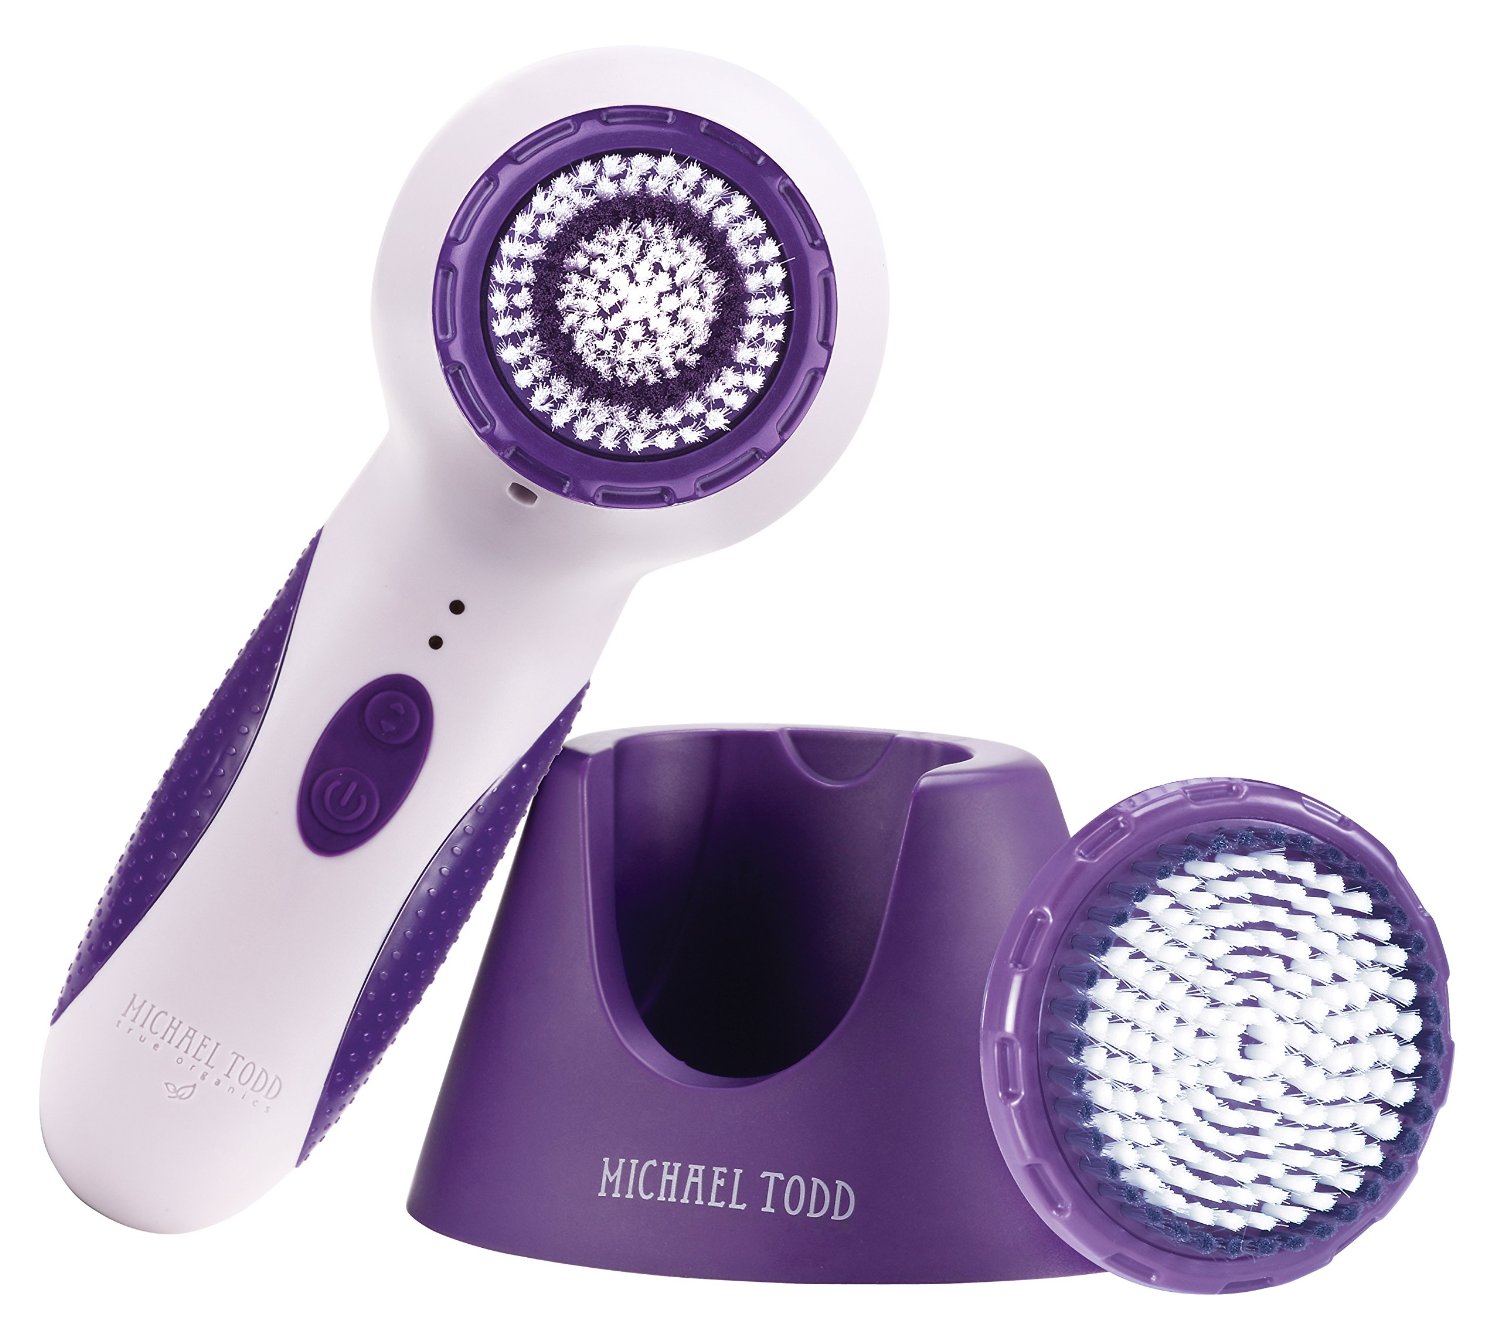 Soniclear Anti-microbial Facial Skin Cleansing Brush System - Lavender Lust